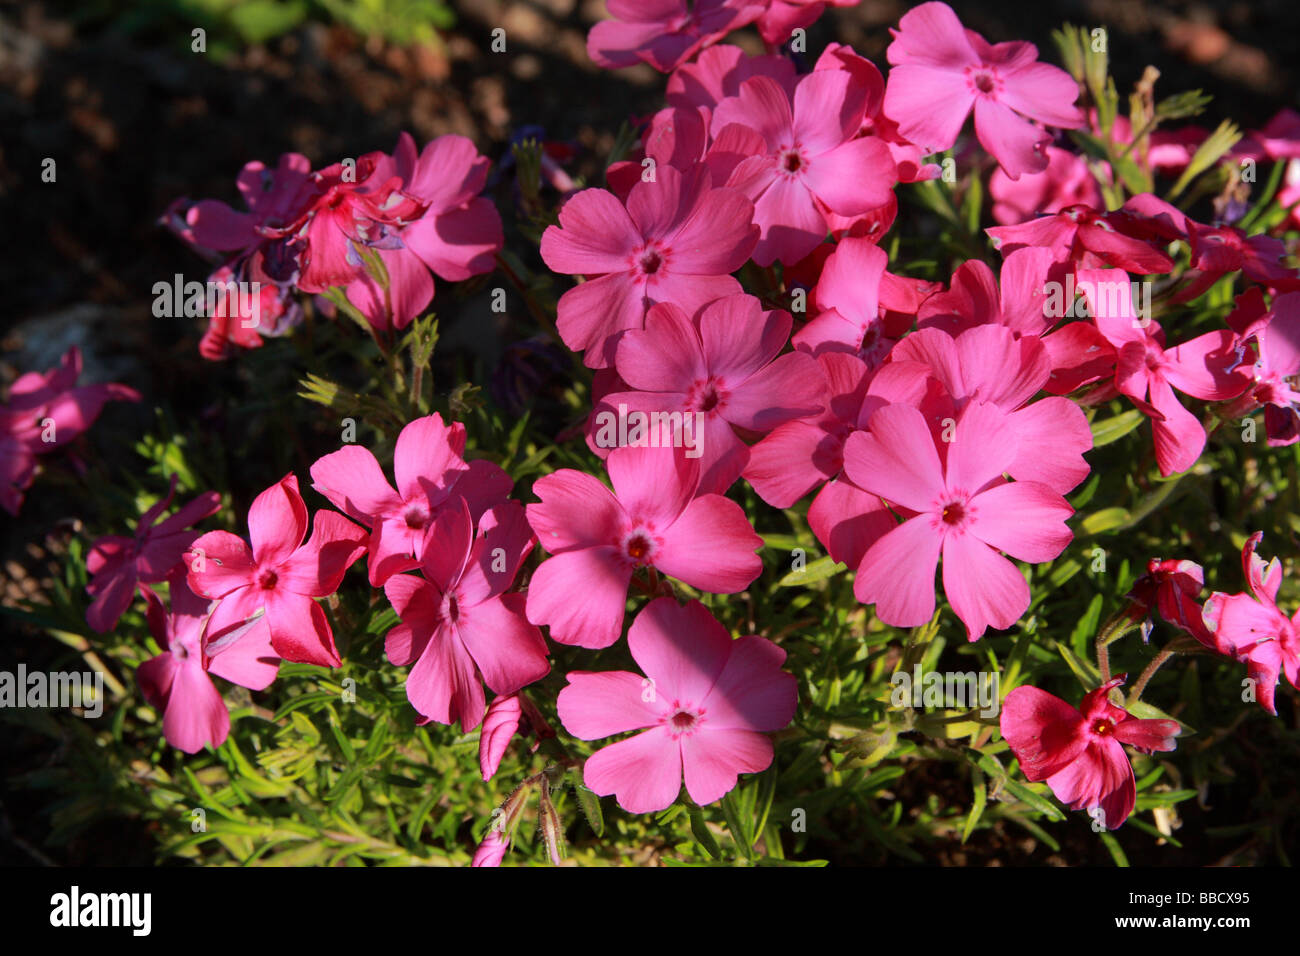 Prostrate Growing Pink Phlox Stock Photo